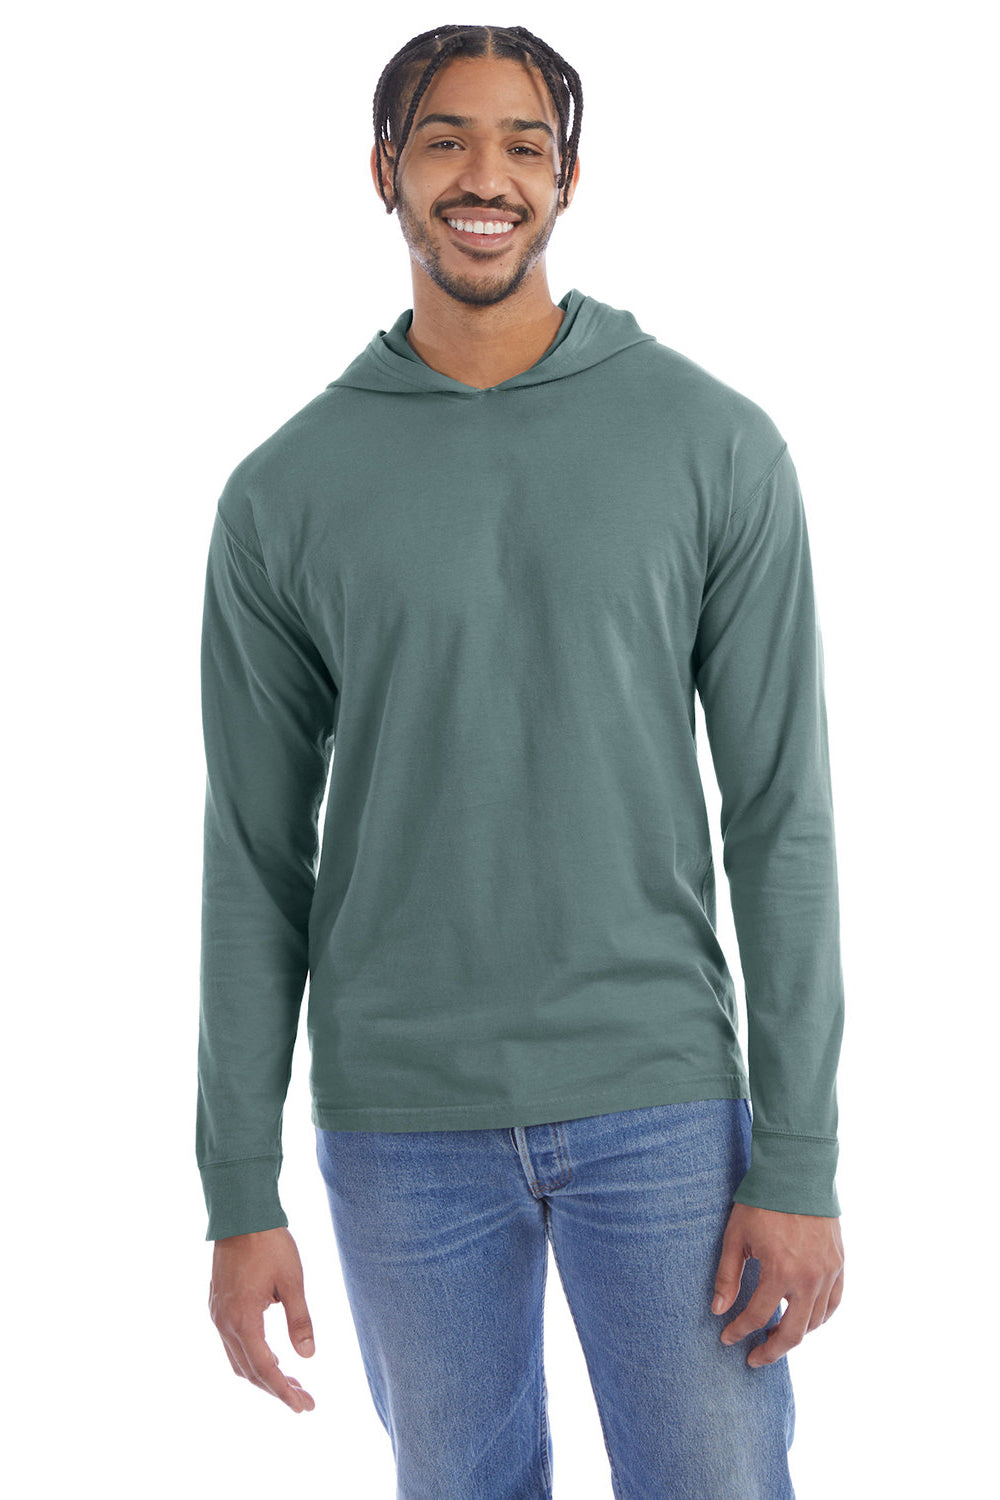 ComfortWash by Hanes GDH280 Mens Jersey Long Sleeve Hooded T-Shirt Hoodie Cypress Green Front